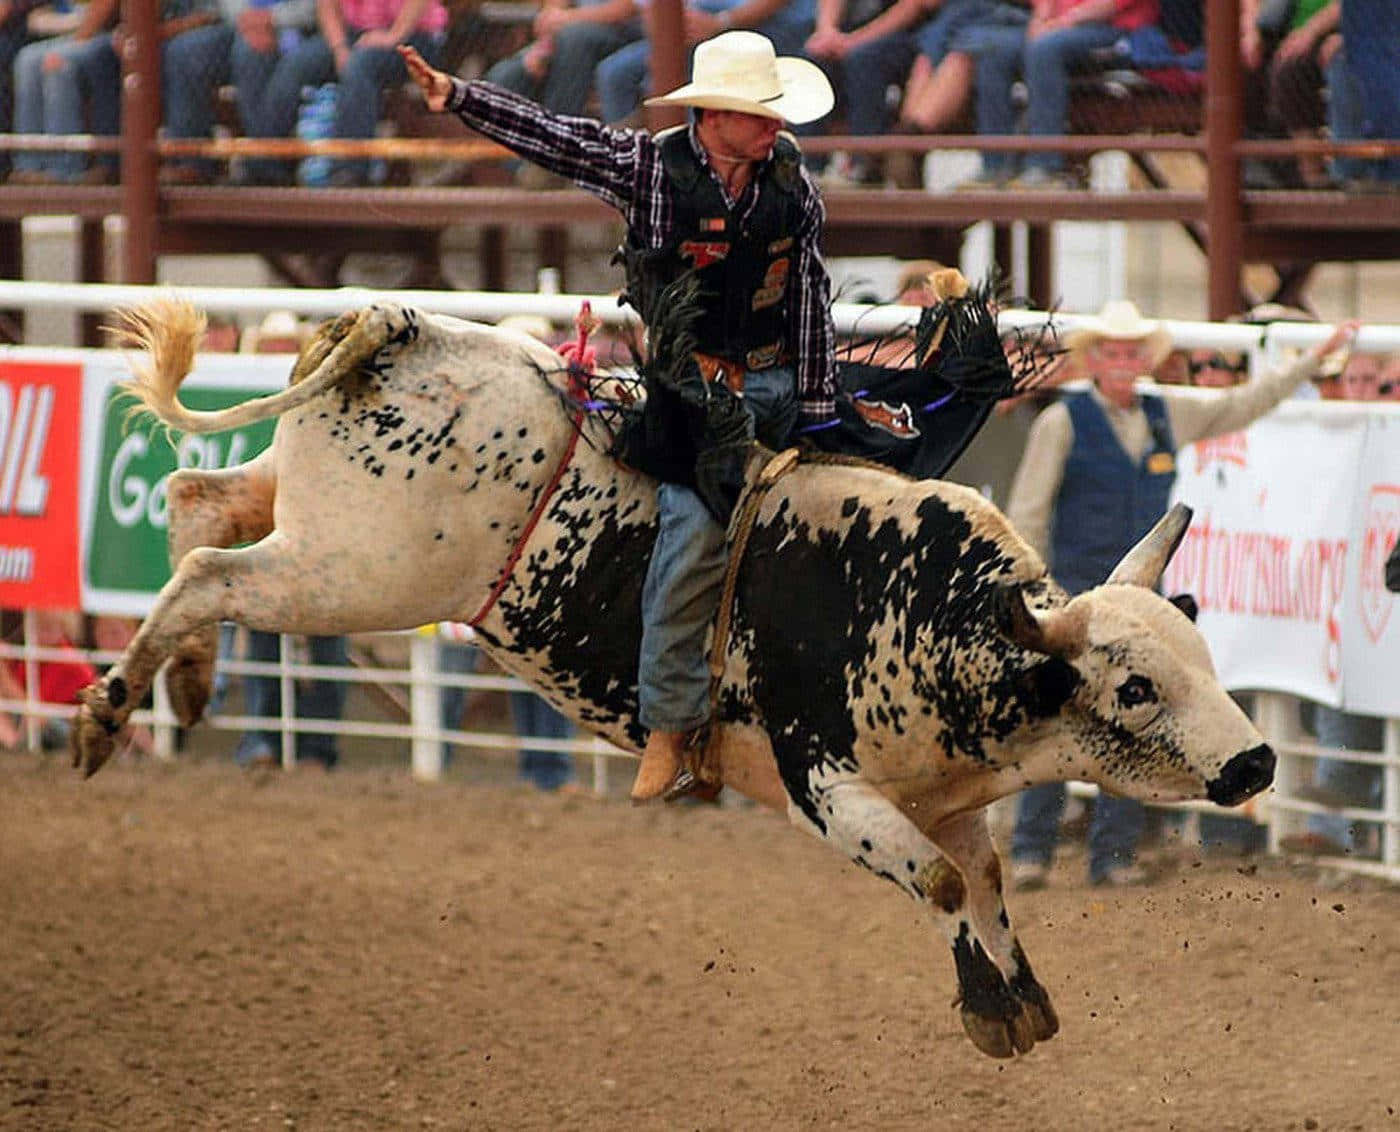 "Fearless Cowboys Riding the Wild Bull"